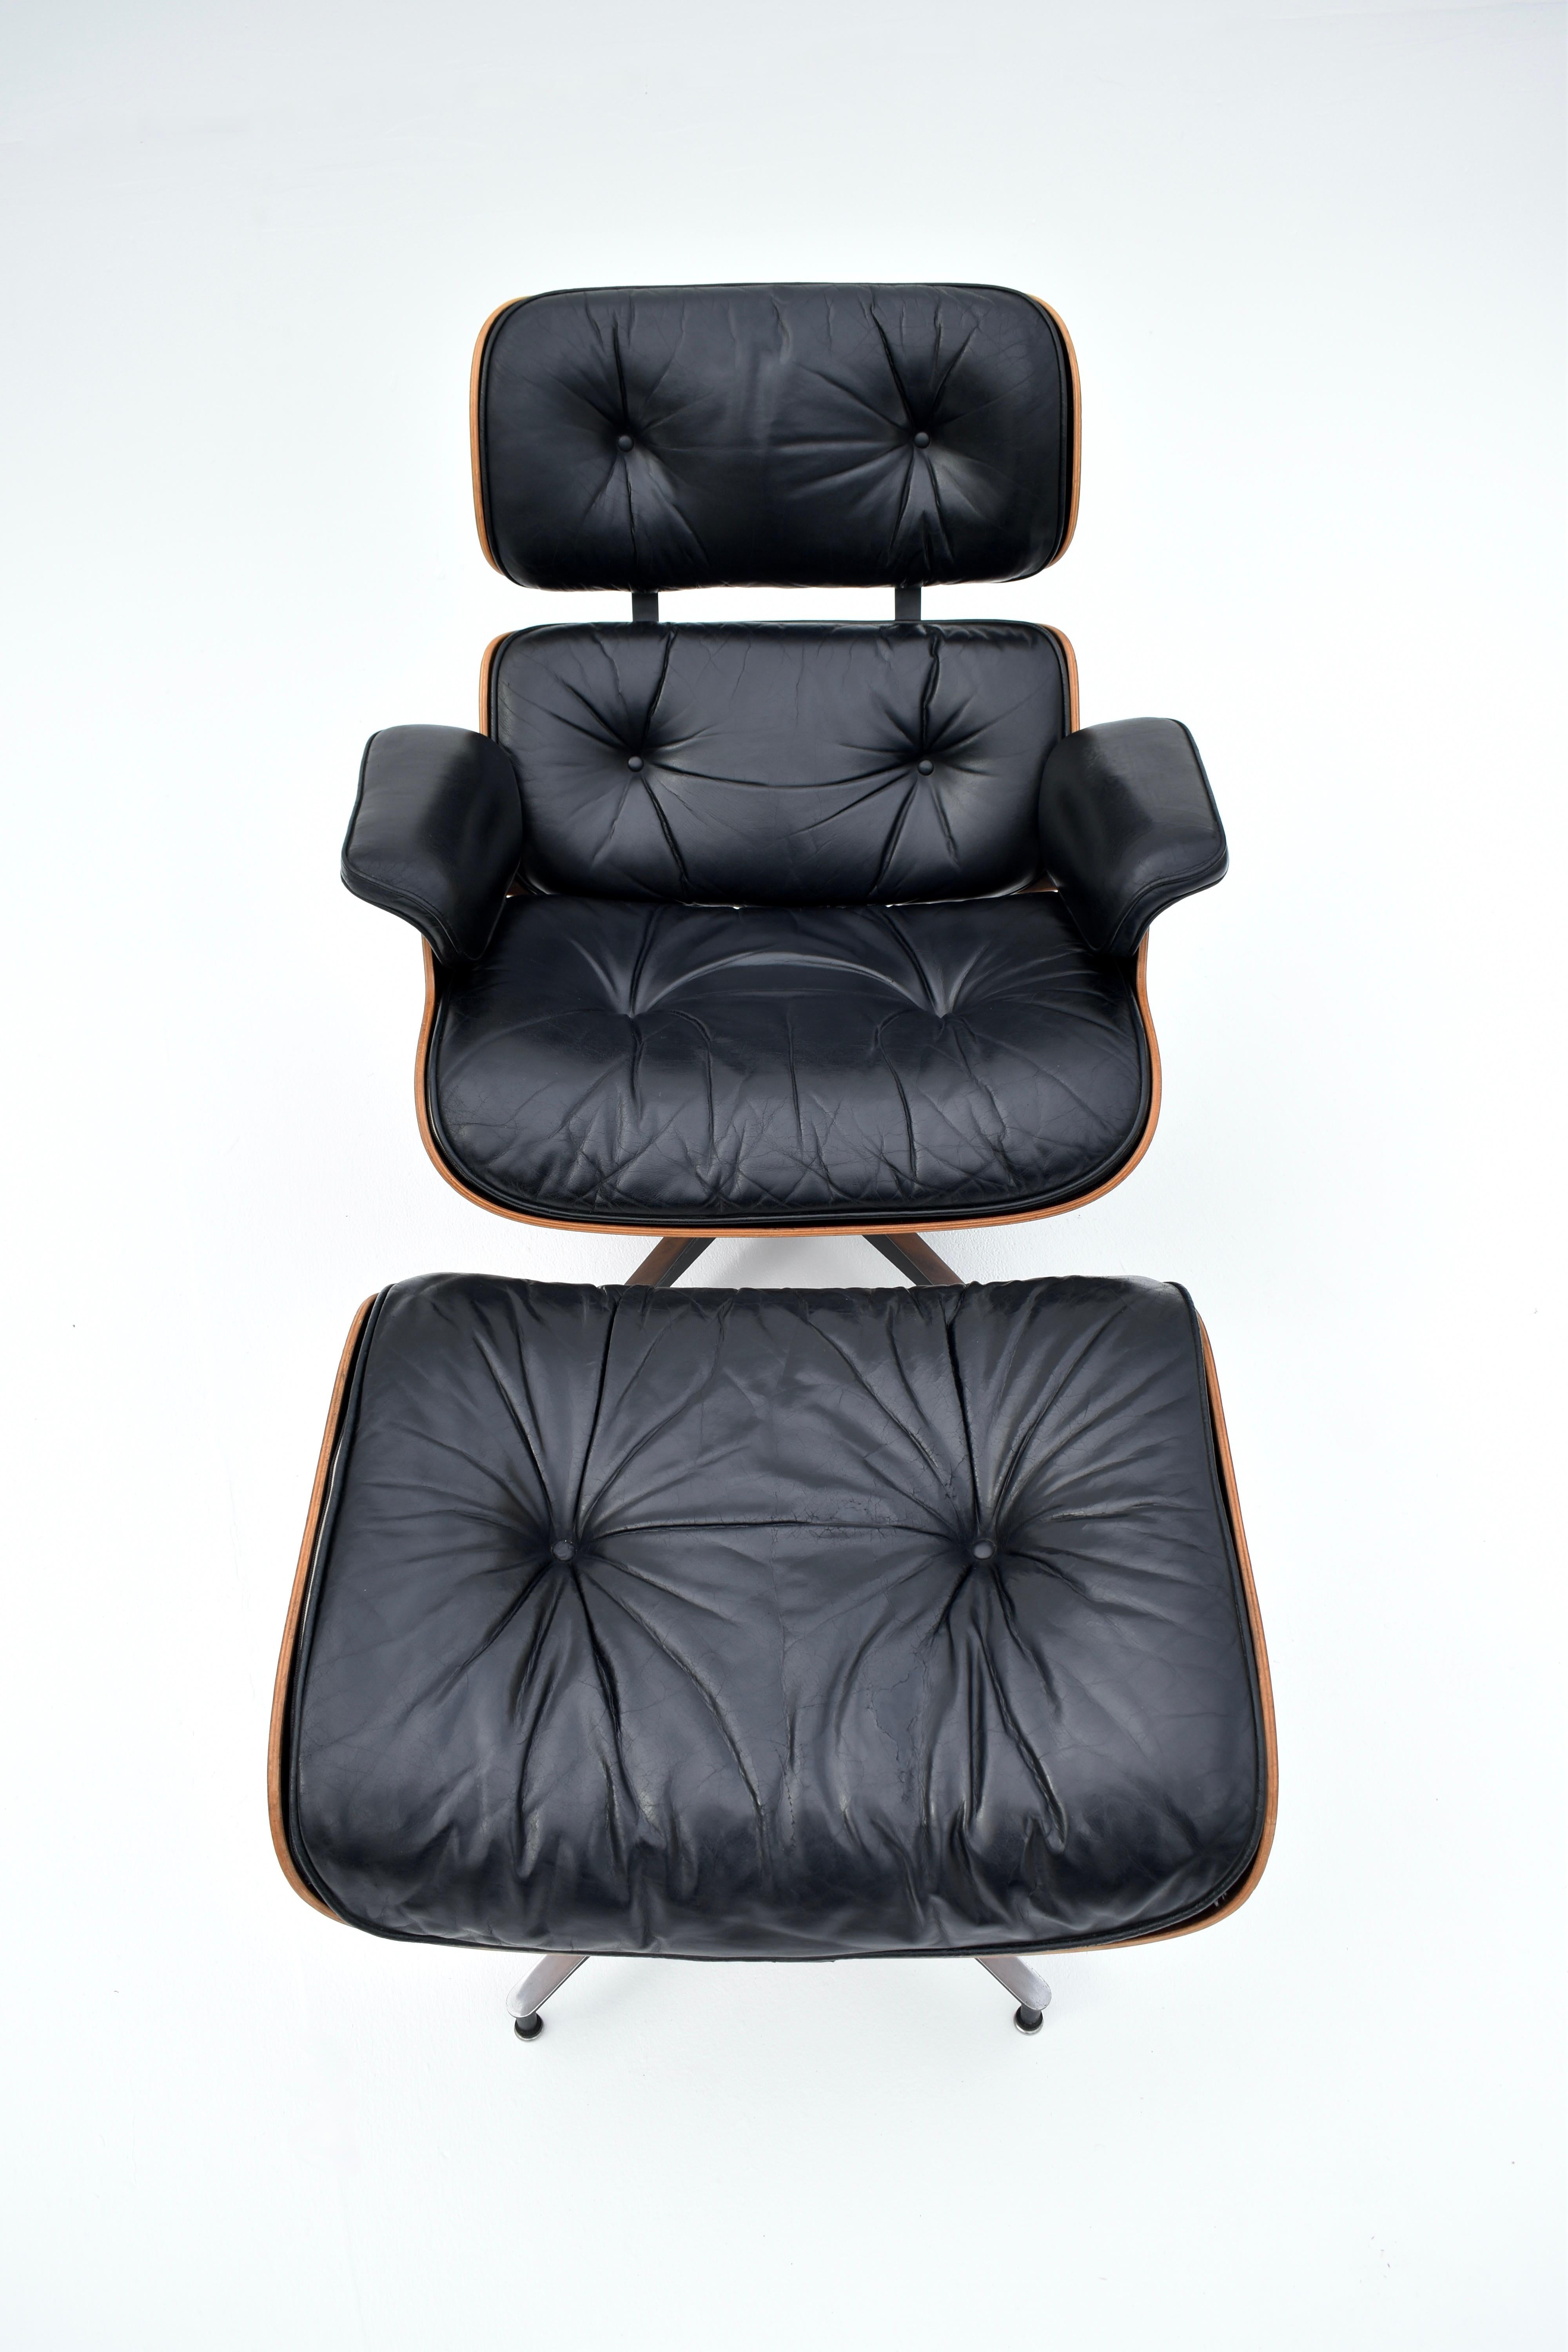 Original 1960's Production Eames Lounge Chair & Ottoman For Herman Miller For Sale 4